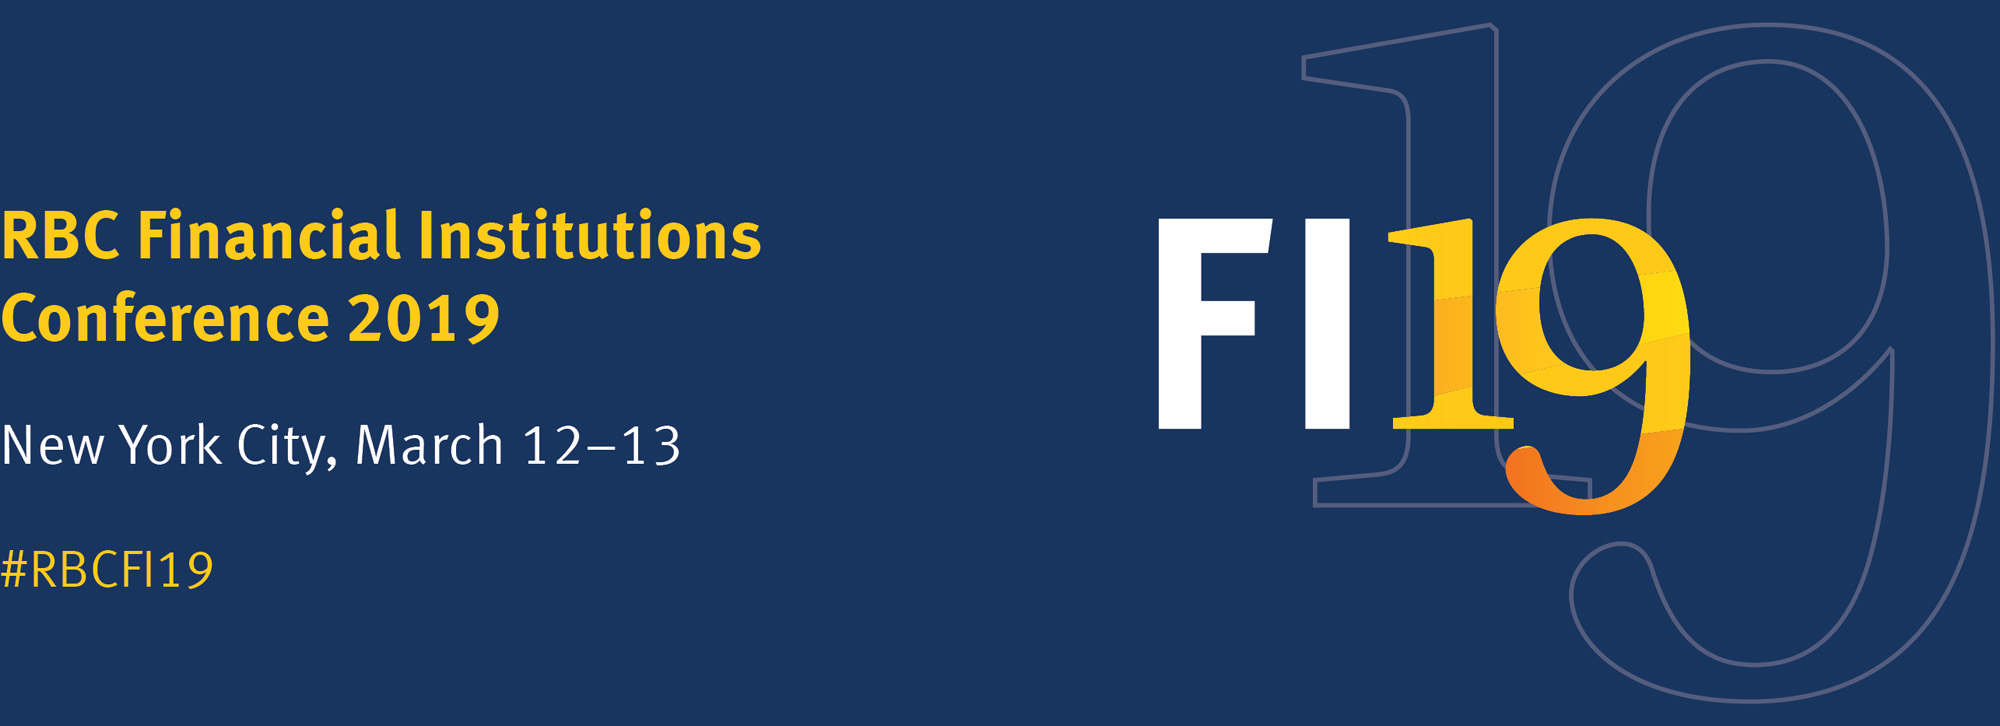 RBC Financial Institutions Conference 2019 | New York City, March 12-13 | #RBCFI19